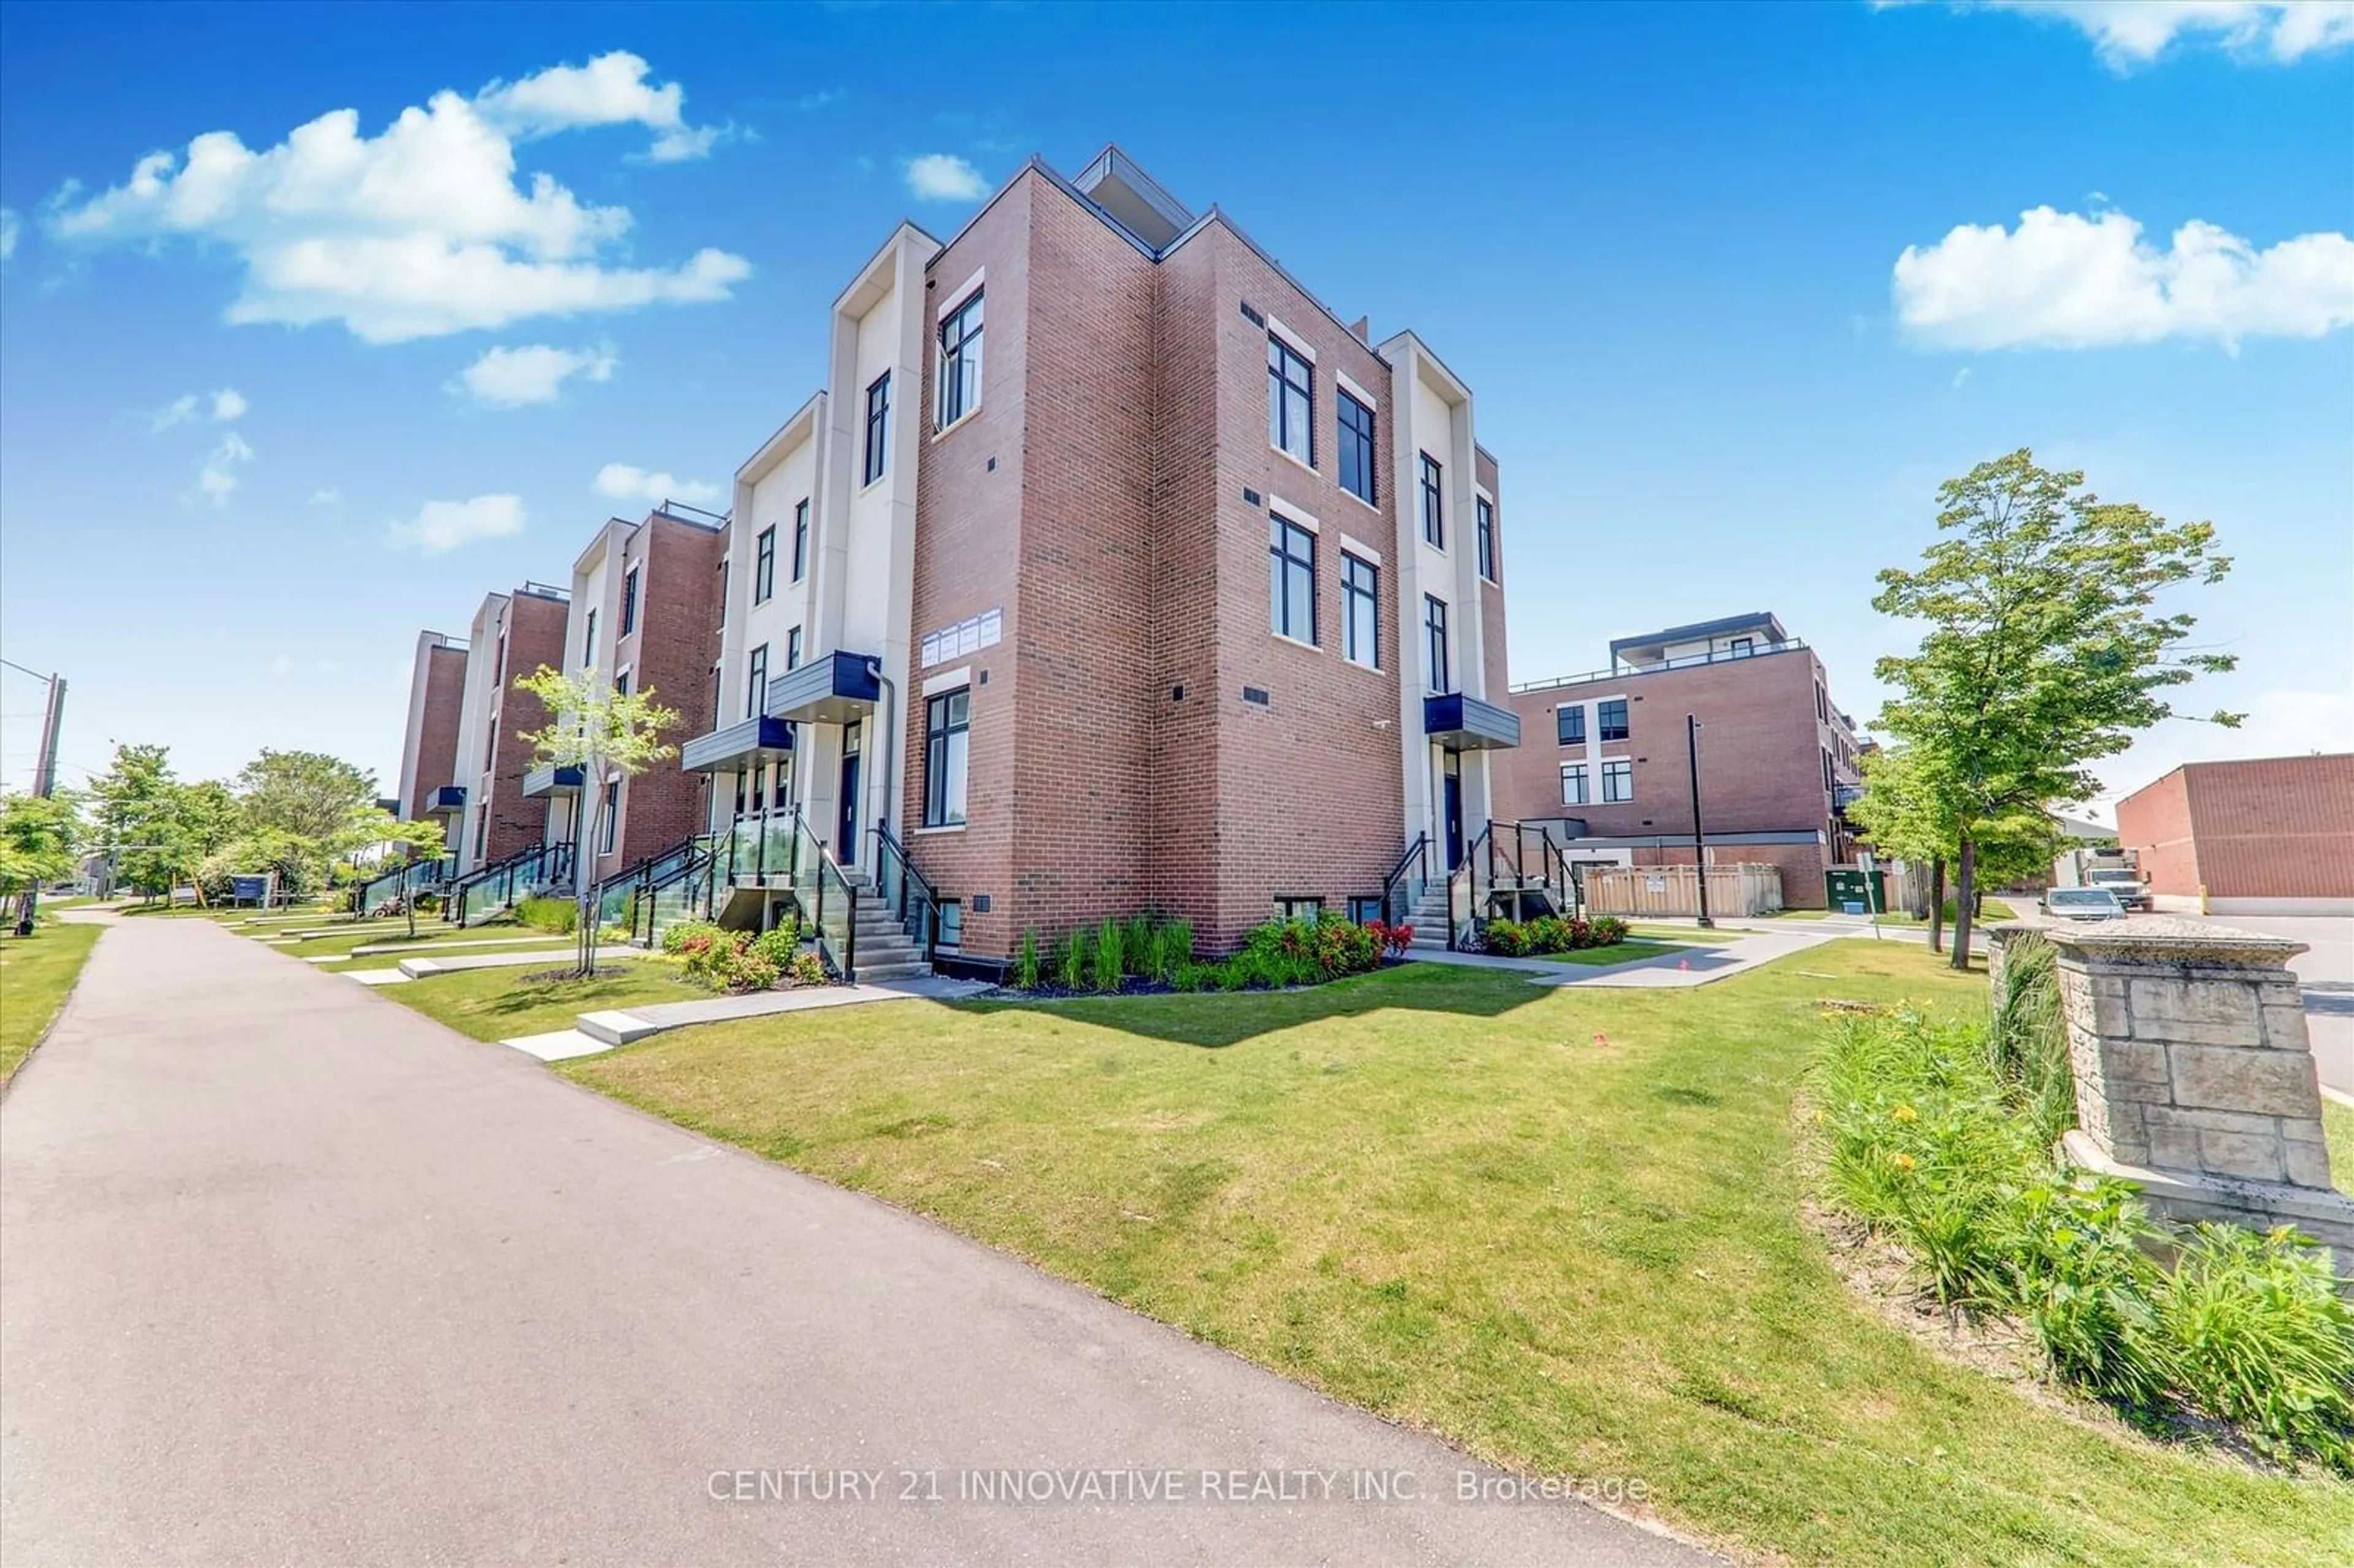 A pic from exterior of the house or condo for 9560 Islington Ave #L101, Vaughan Ontario L4H 4Z5